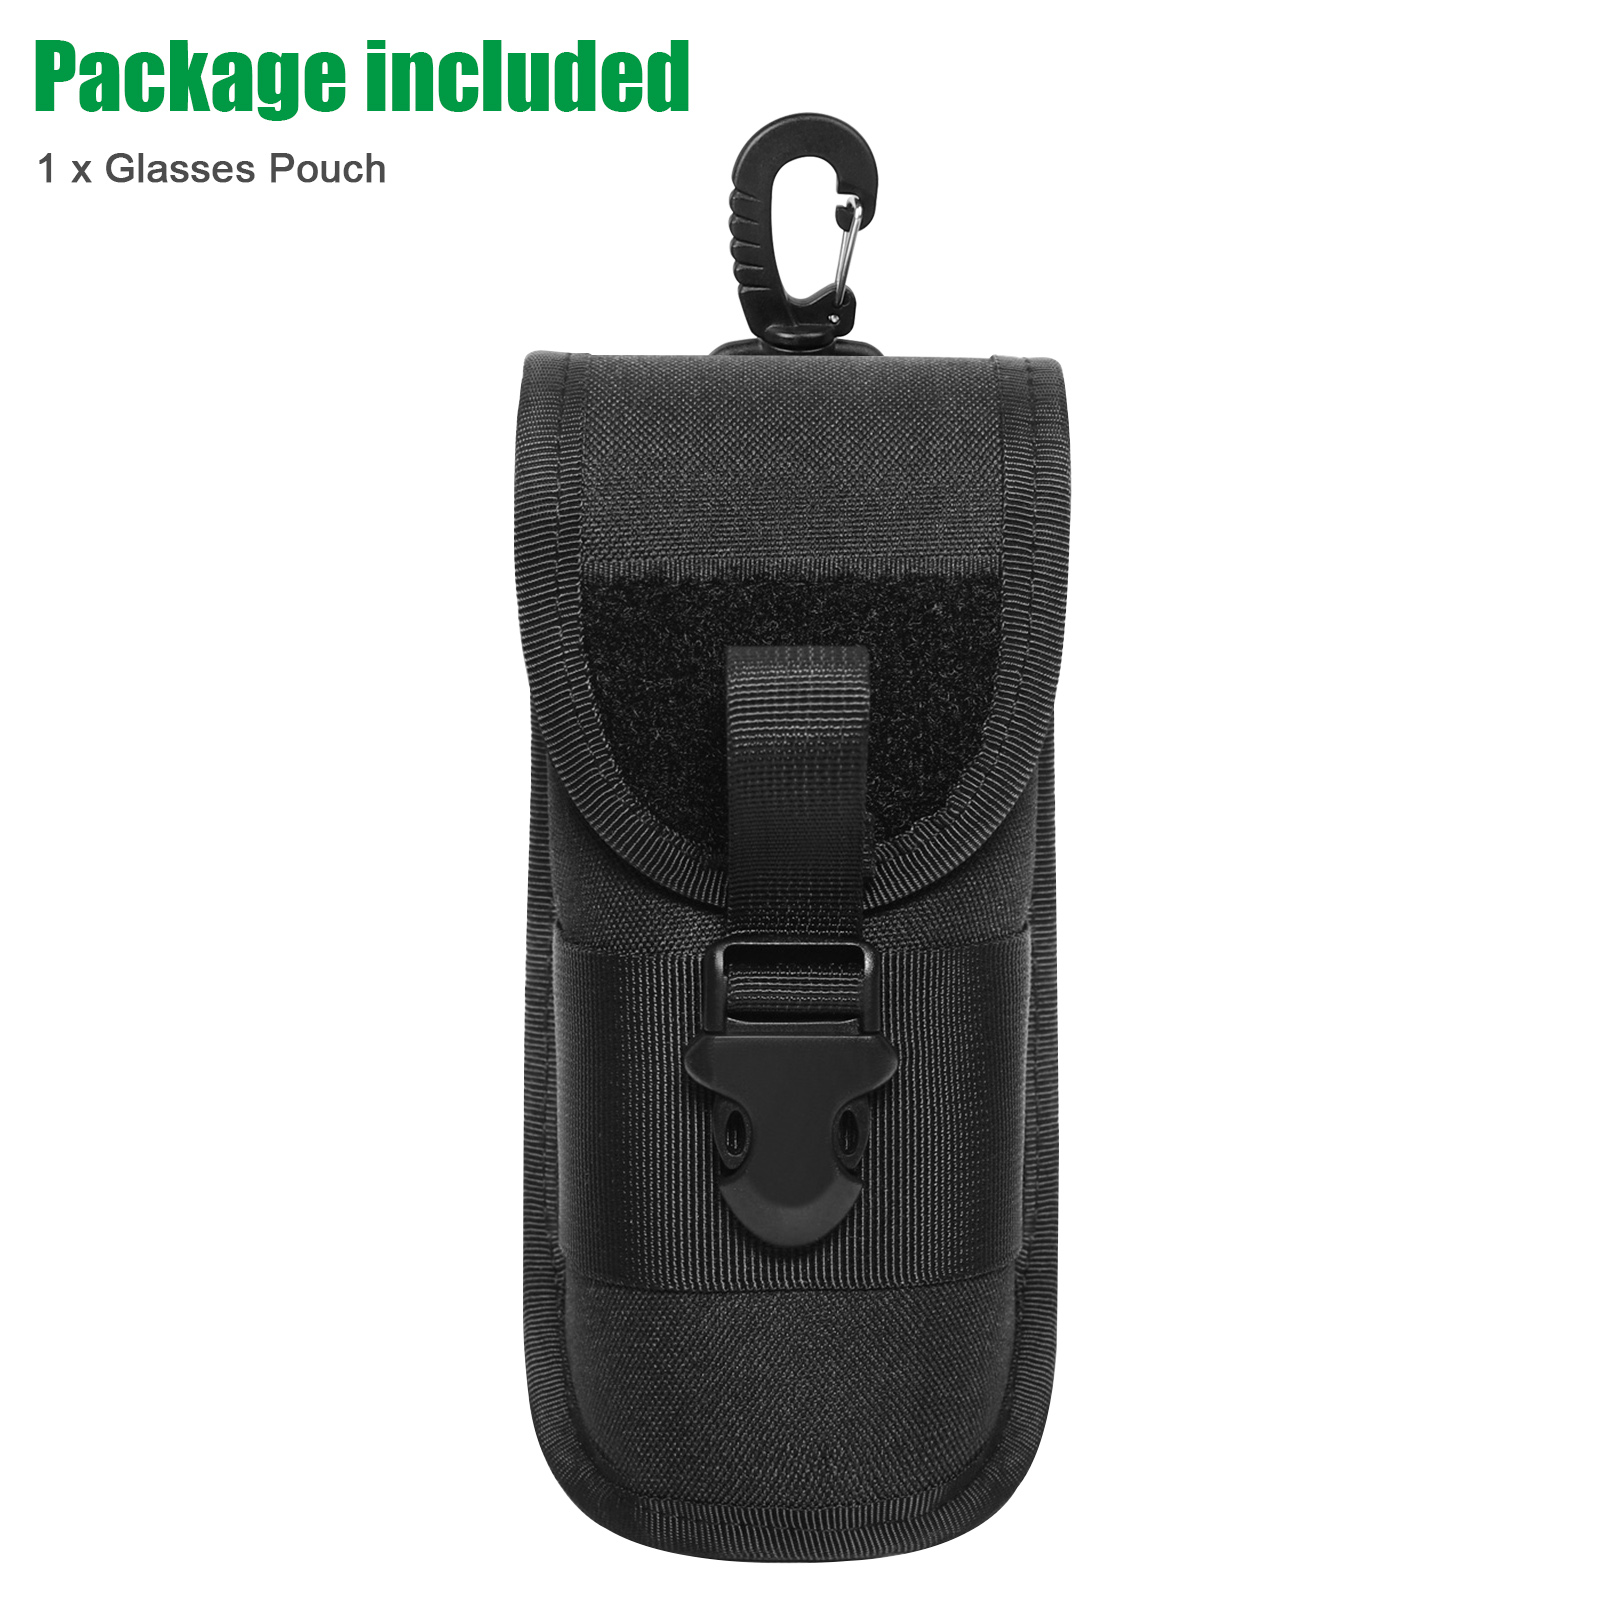 Details about   NEW Tactical Soft Eyeglasses Reading Glasses Case Pouch with Belt Clip Cycling 